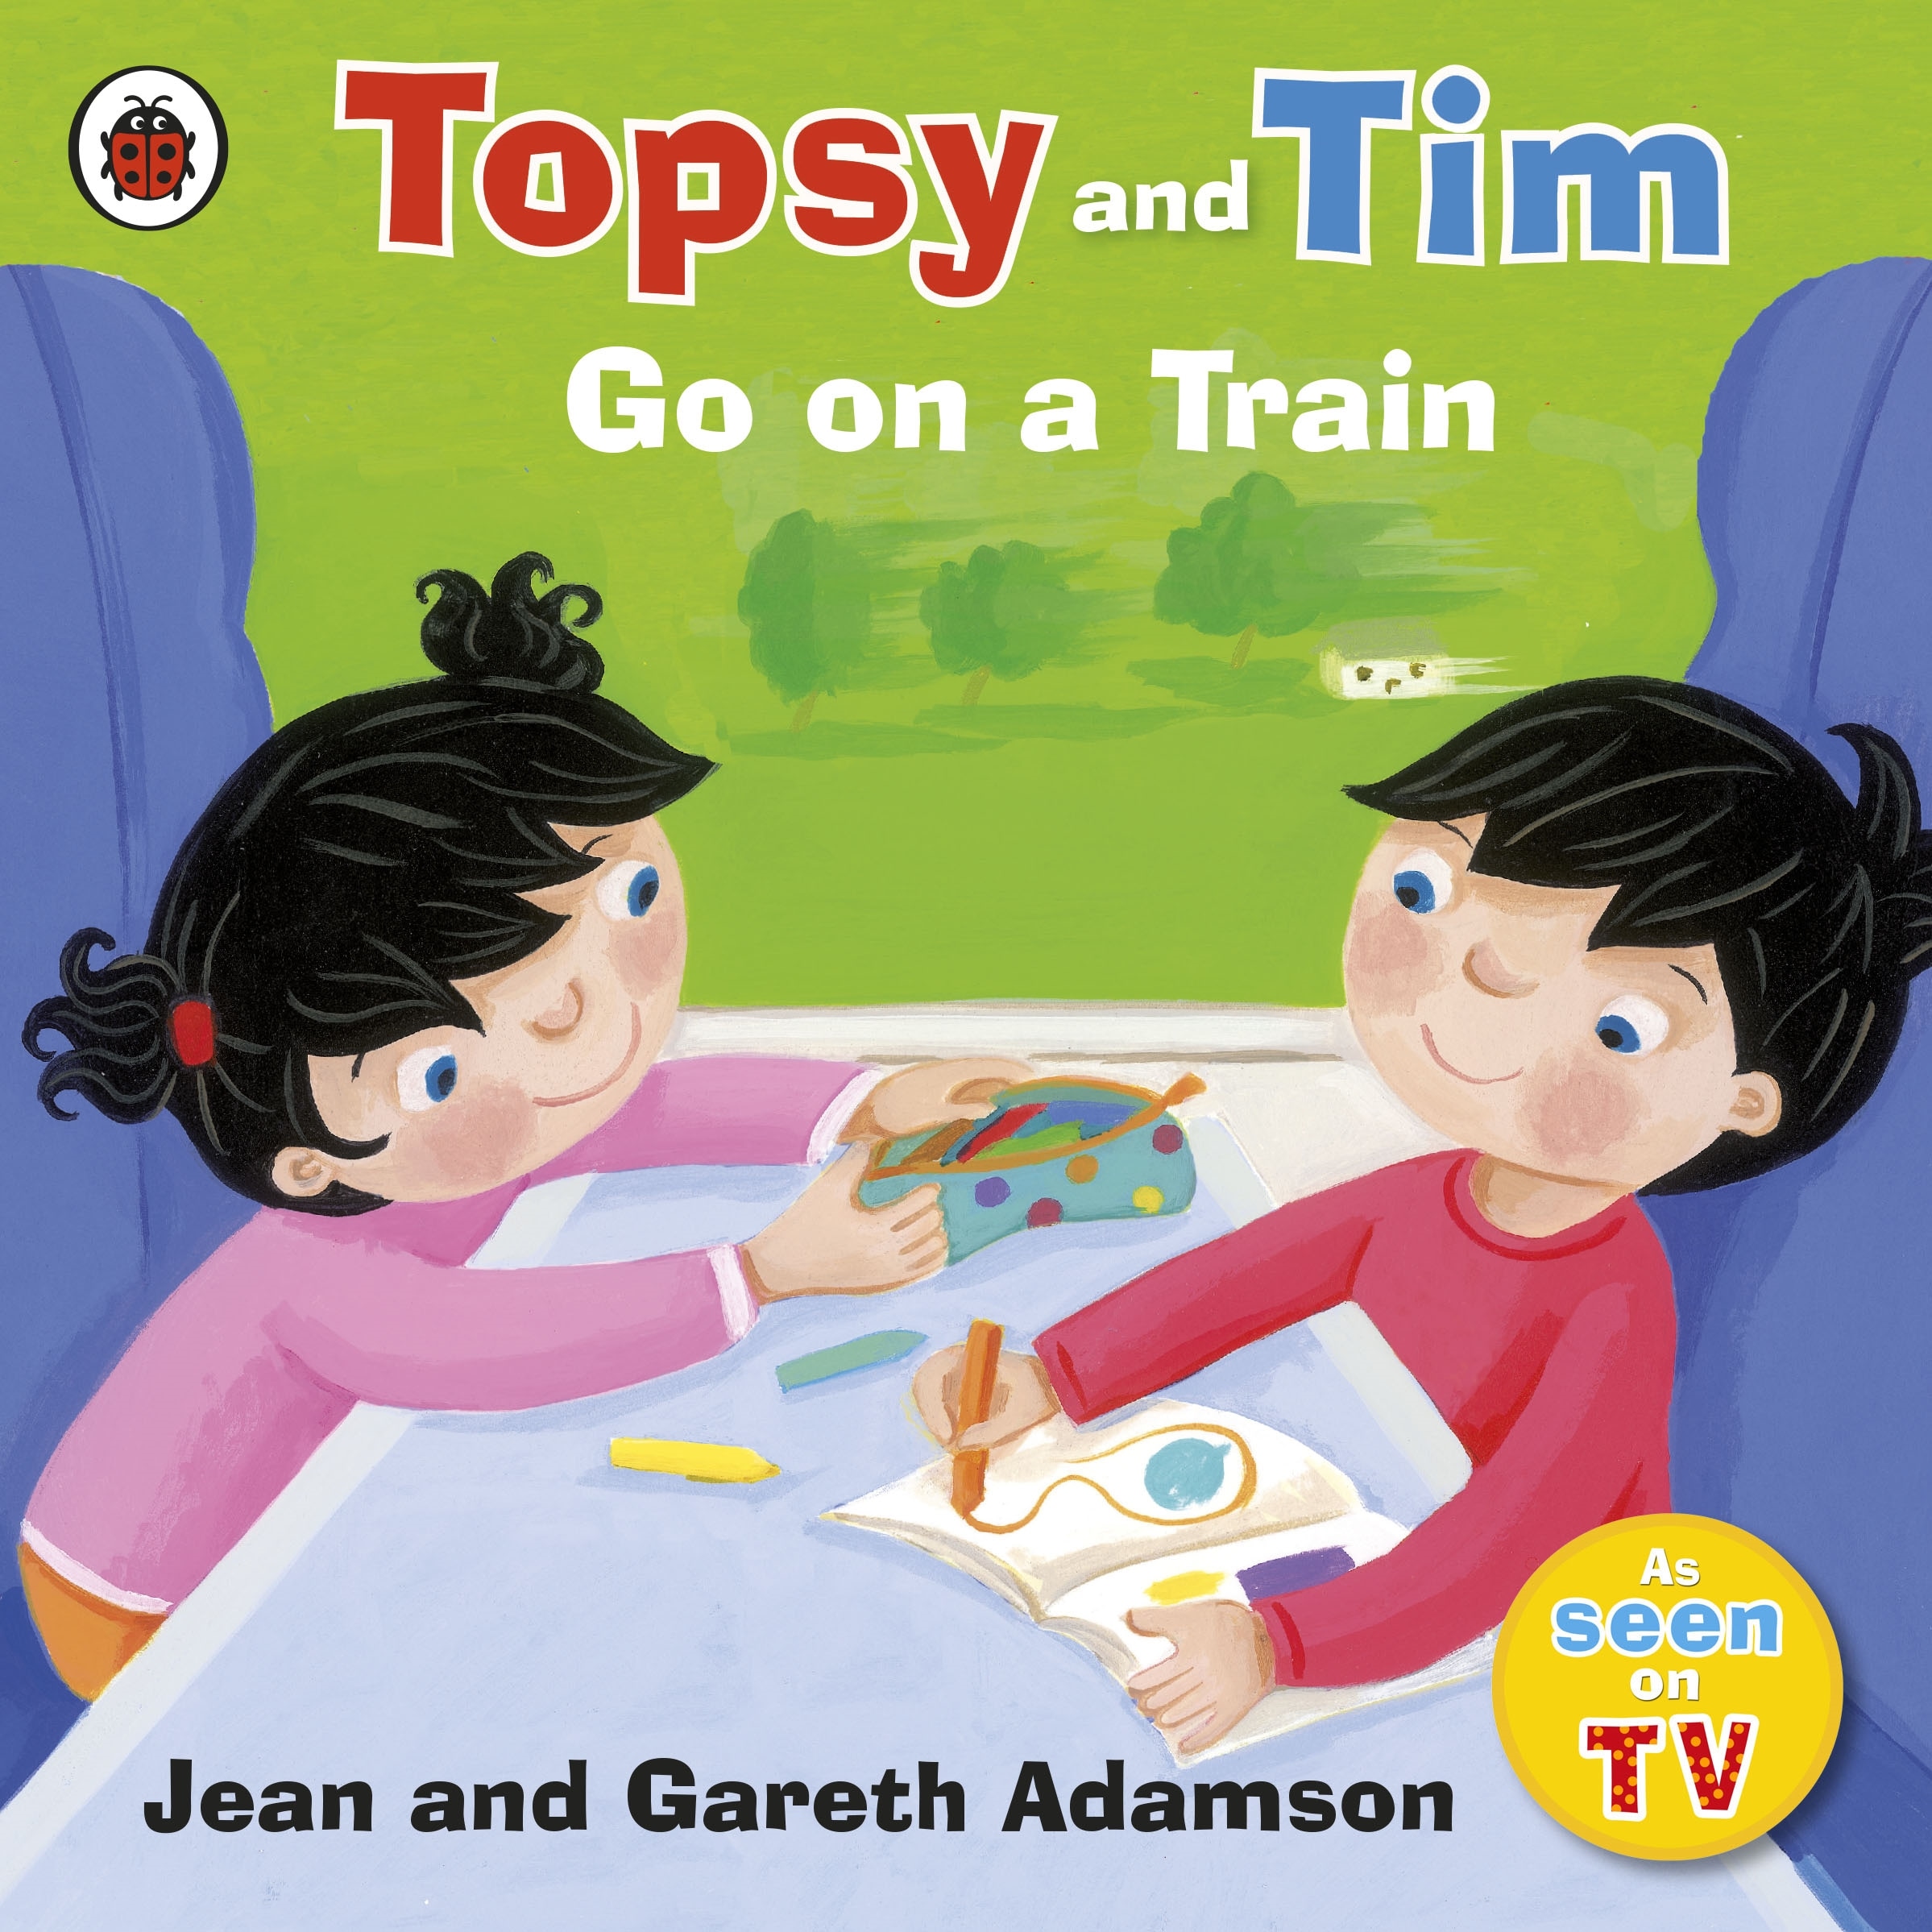 Book “Topsy and Tim: Go on a Train” by Jean Adamson — August 5, 2010